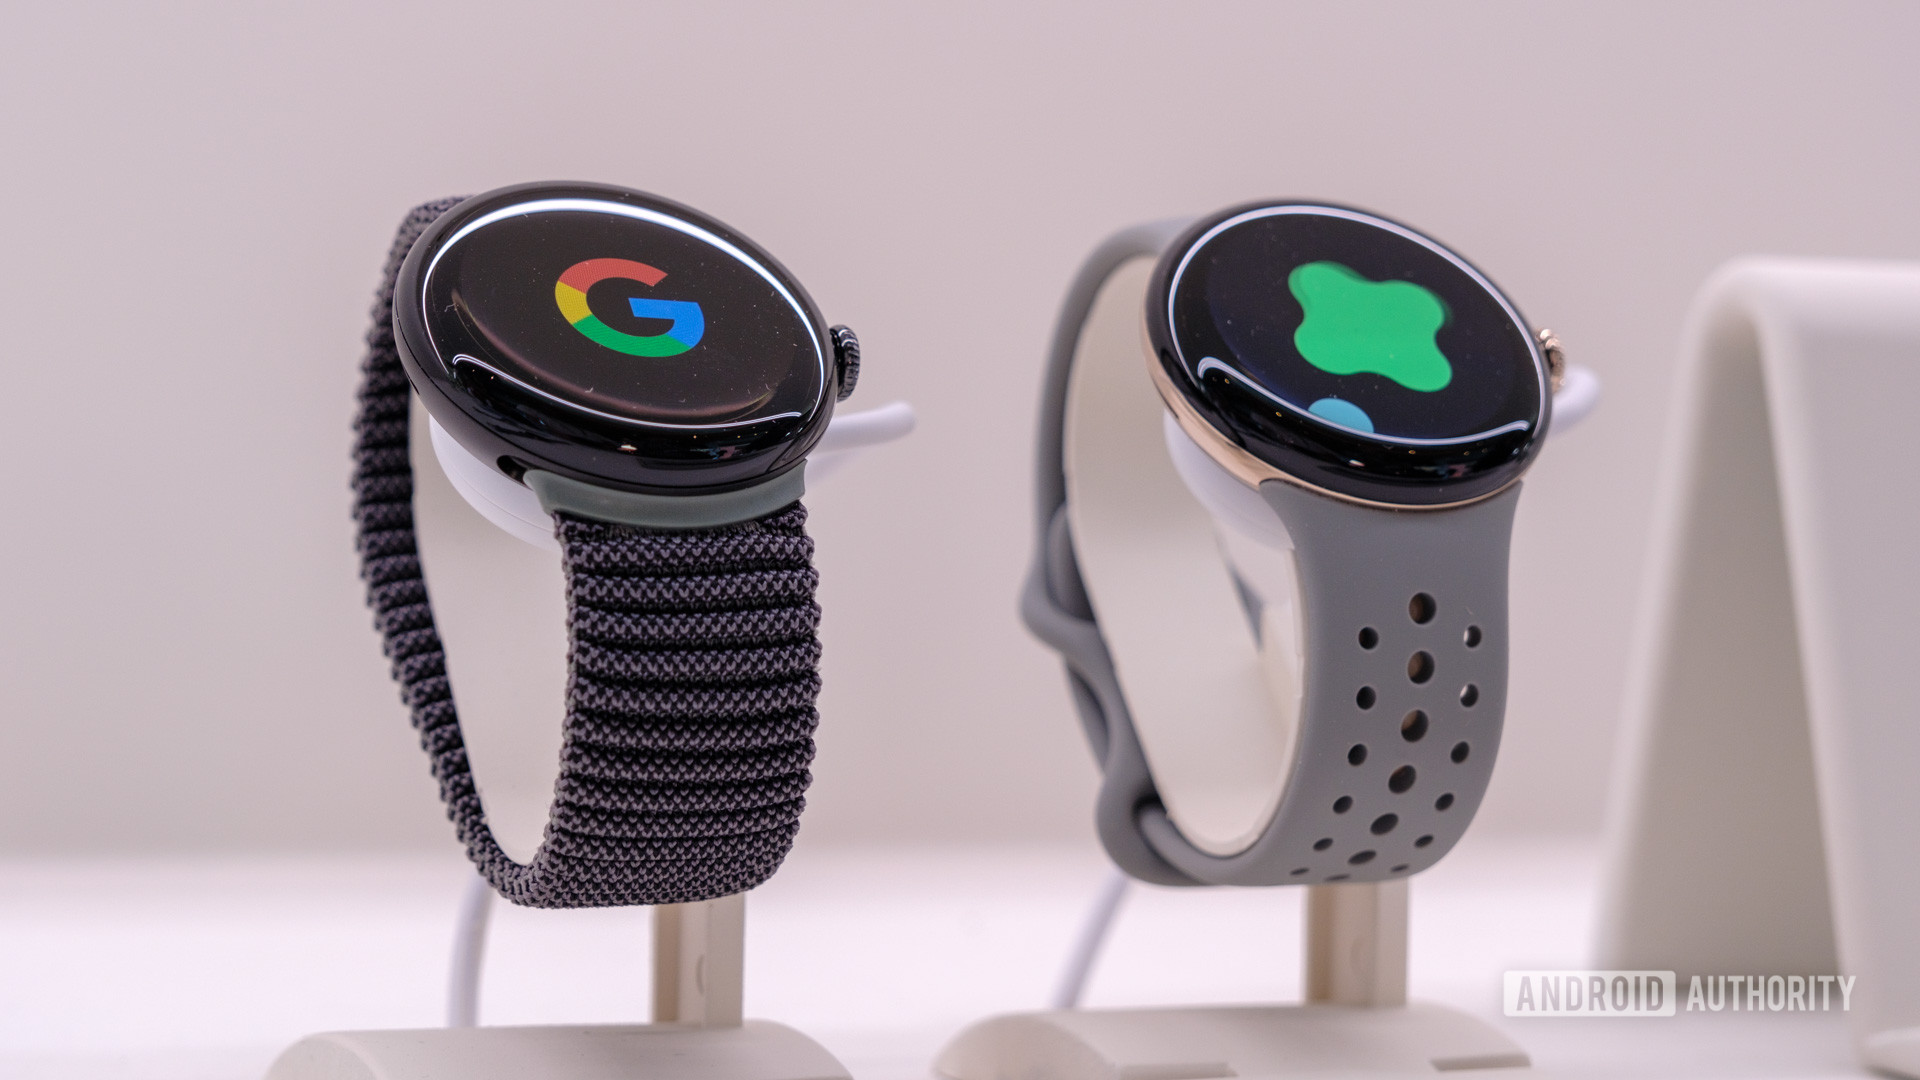 The new Google Pixel Watch 2 on show with 2 different wrist band designs.